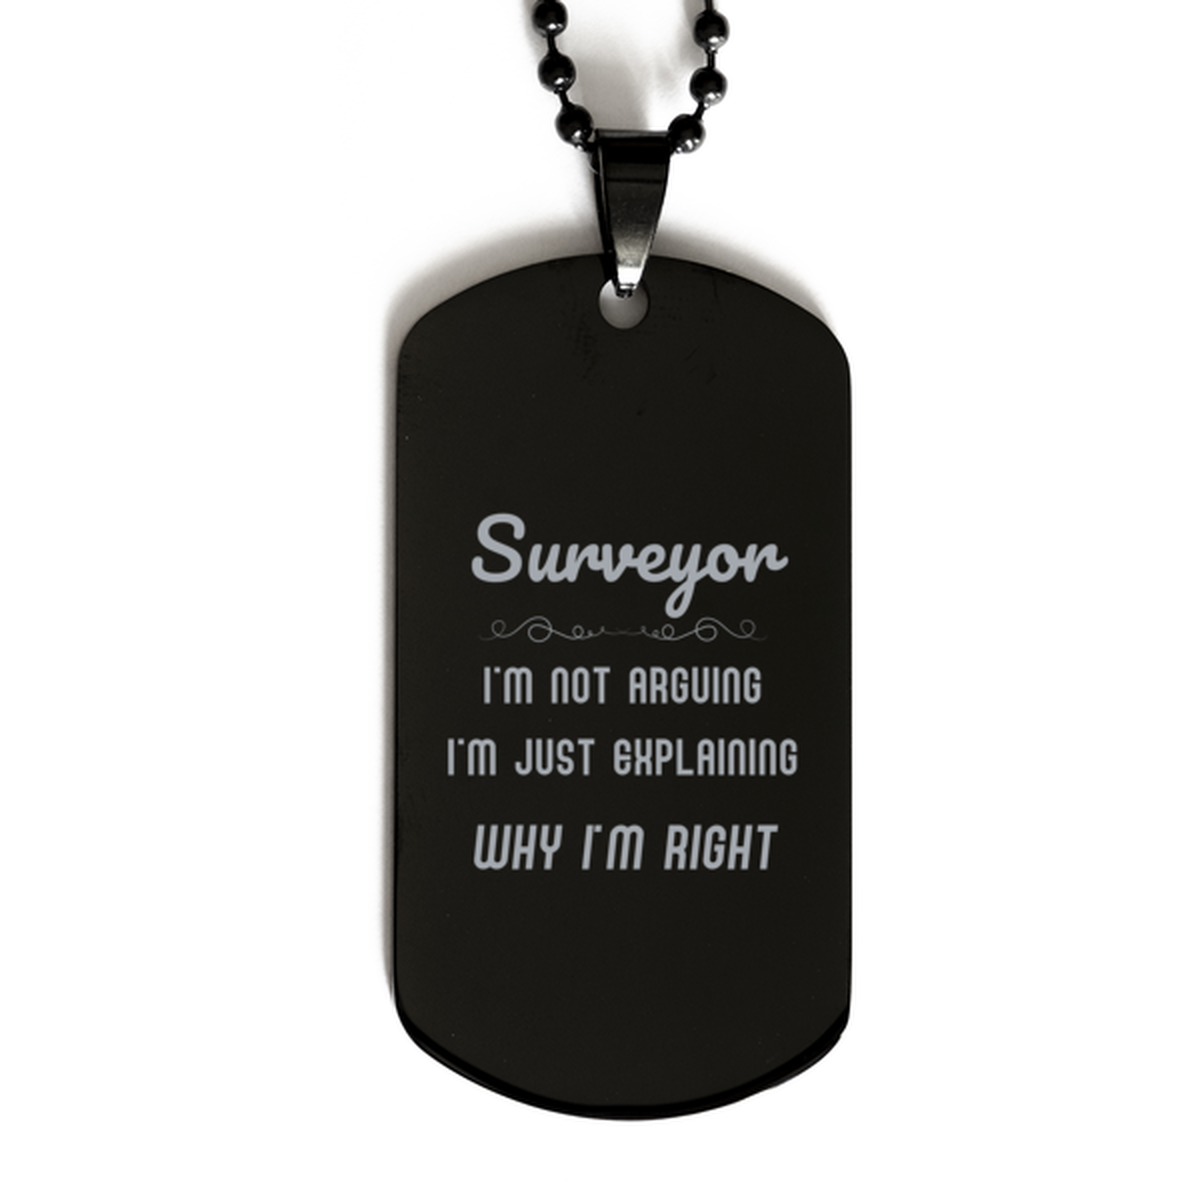 Surveyor I'm not Arguing. I'm Just Explaining Why I'm RIGHT Black Dog Tag, Funny Saying Quote Surveyor Gifts For Surveyor Graduation Birthday Christmas Gifts for Men Women Coworker